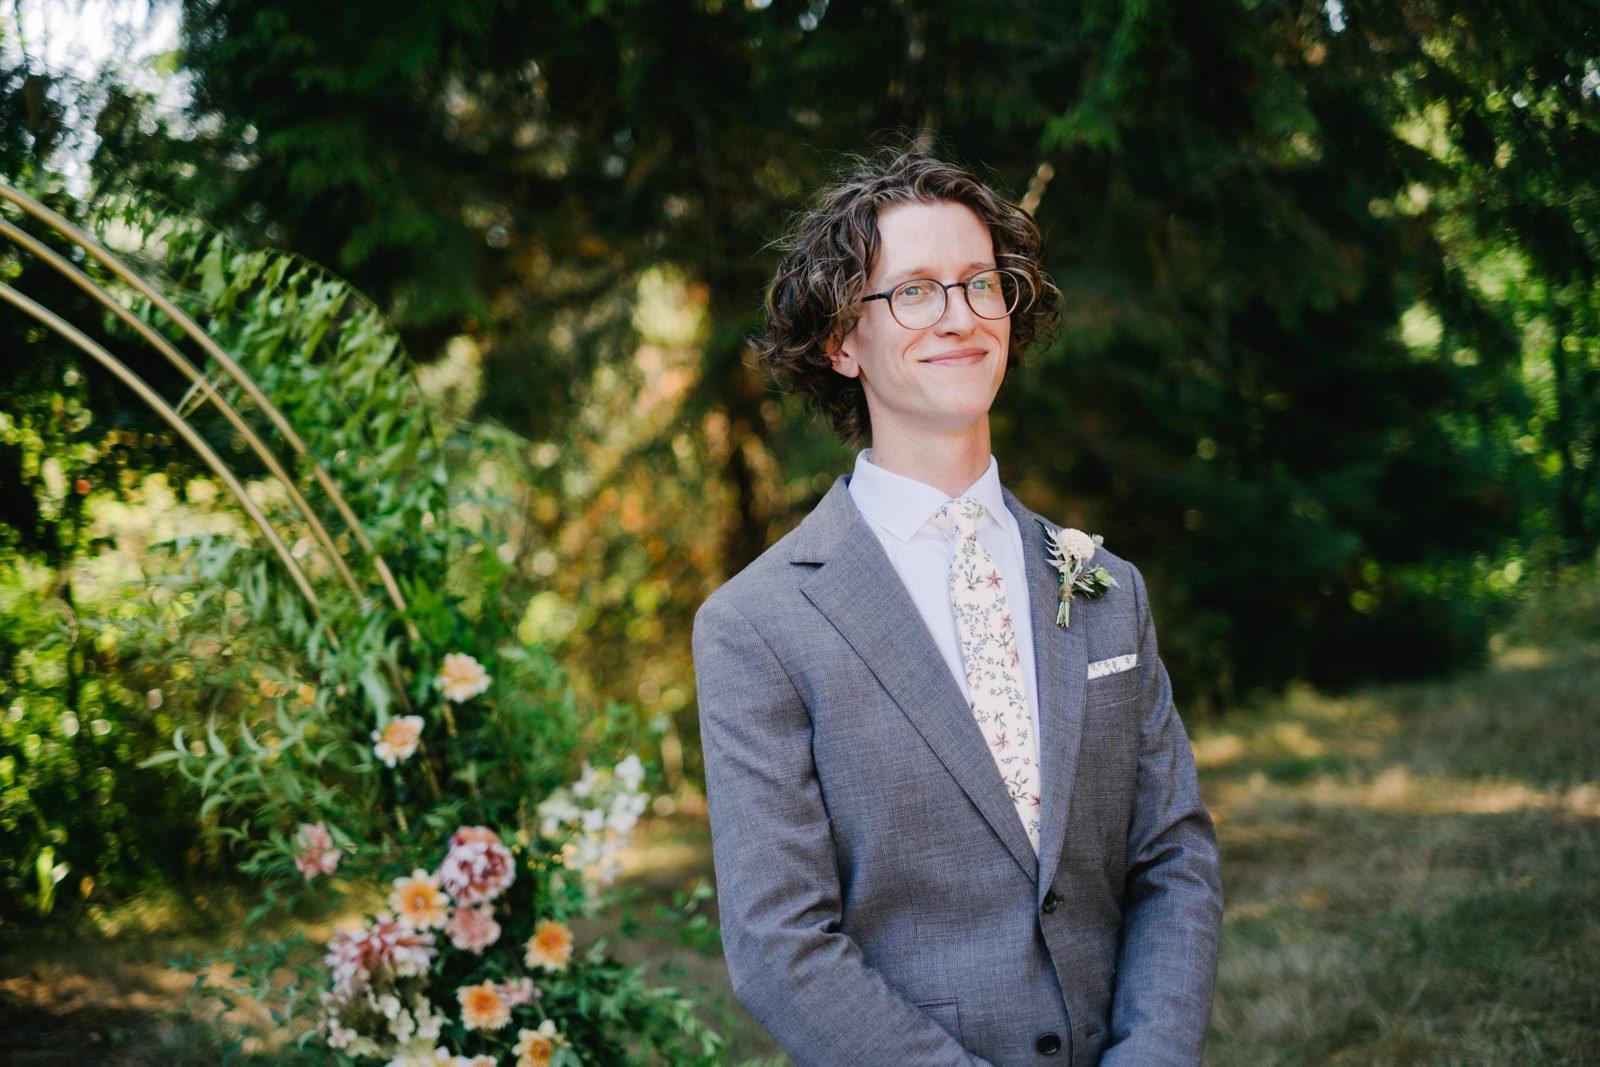  Groom in grey suit and yellow floral tie smiles while waiting for bride down the aisle 